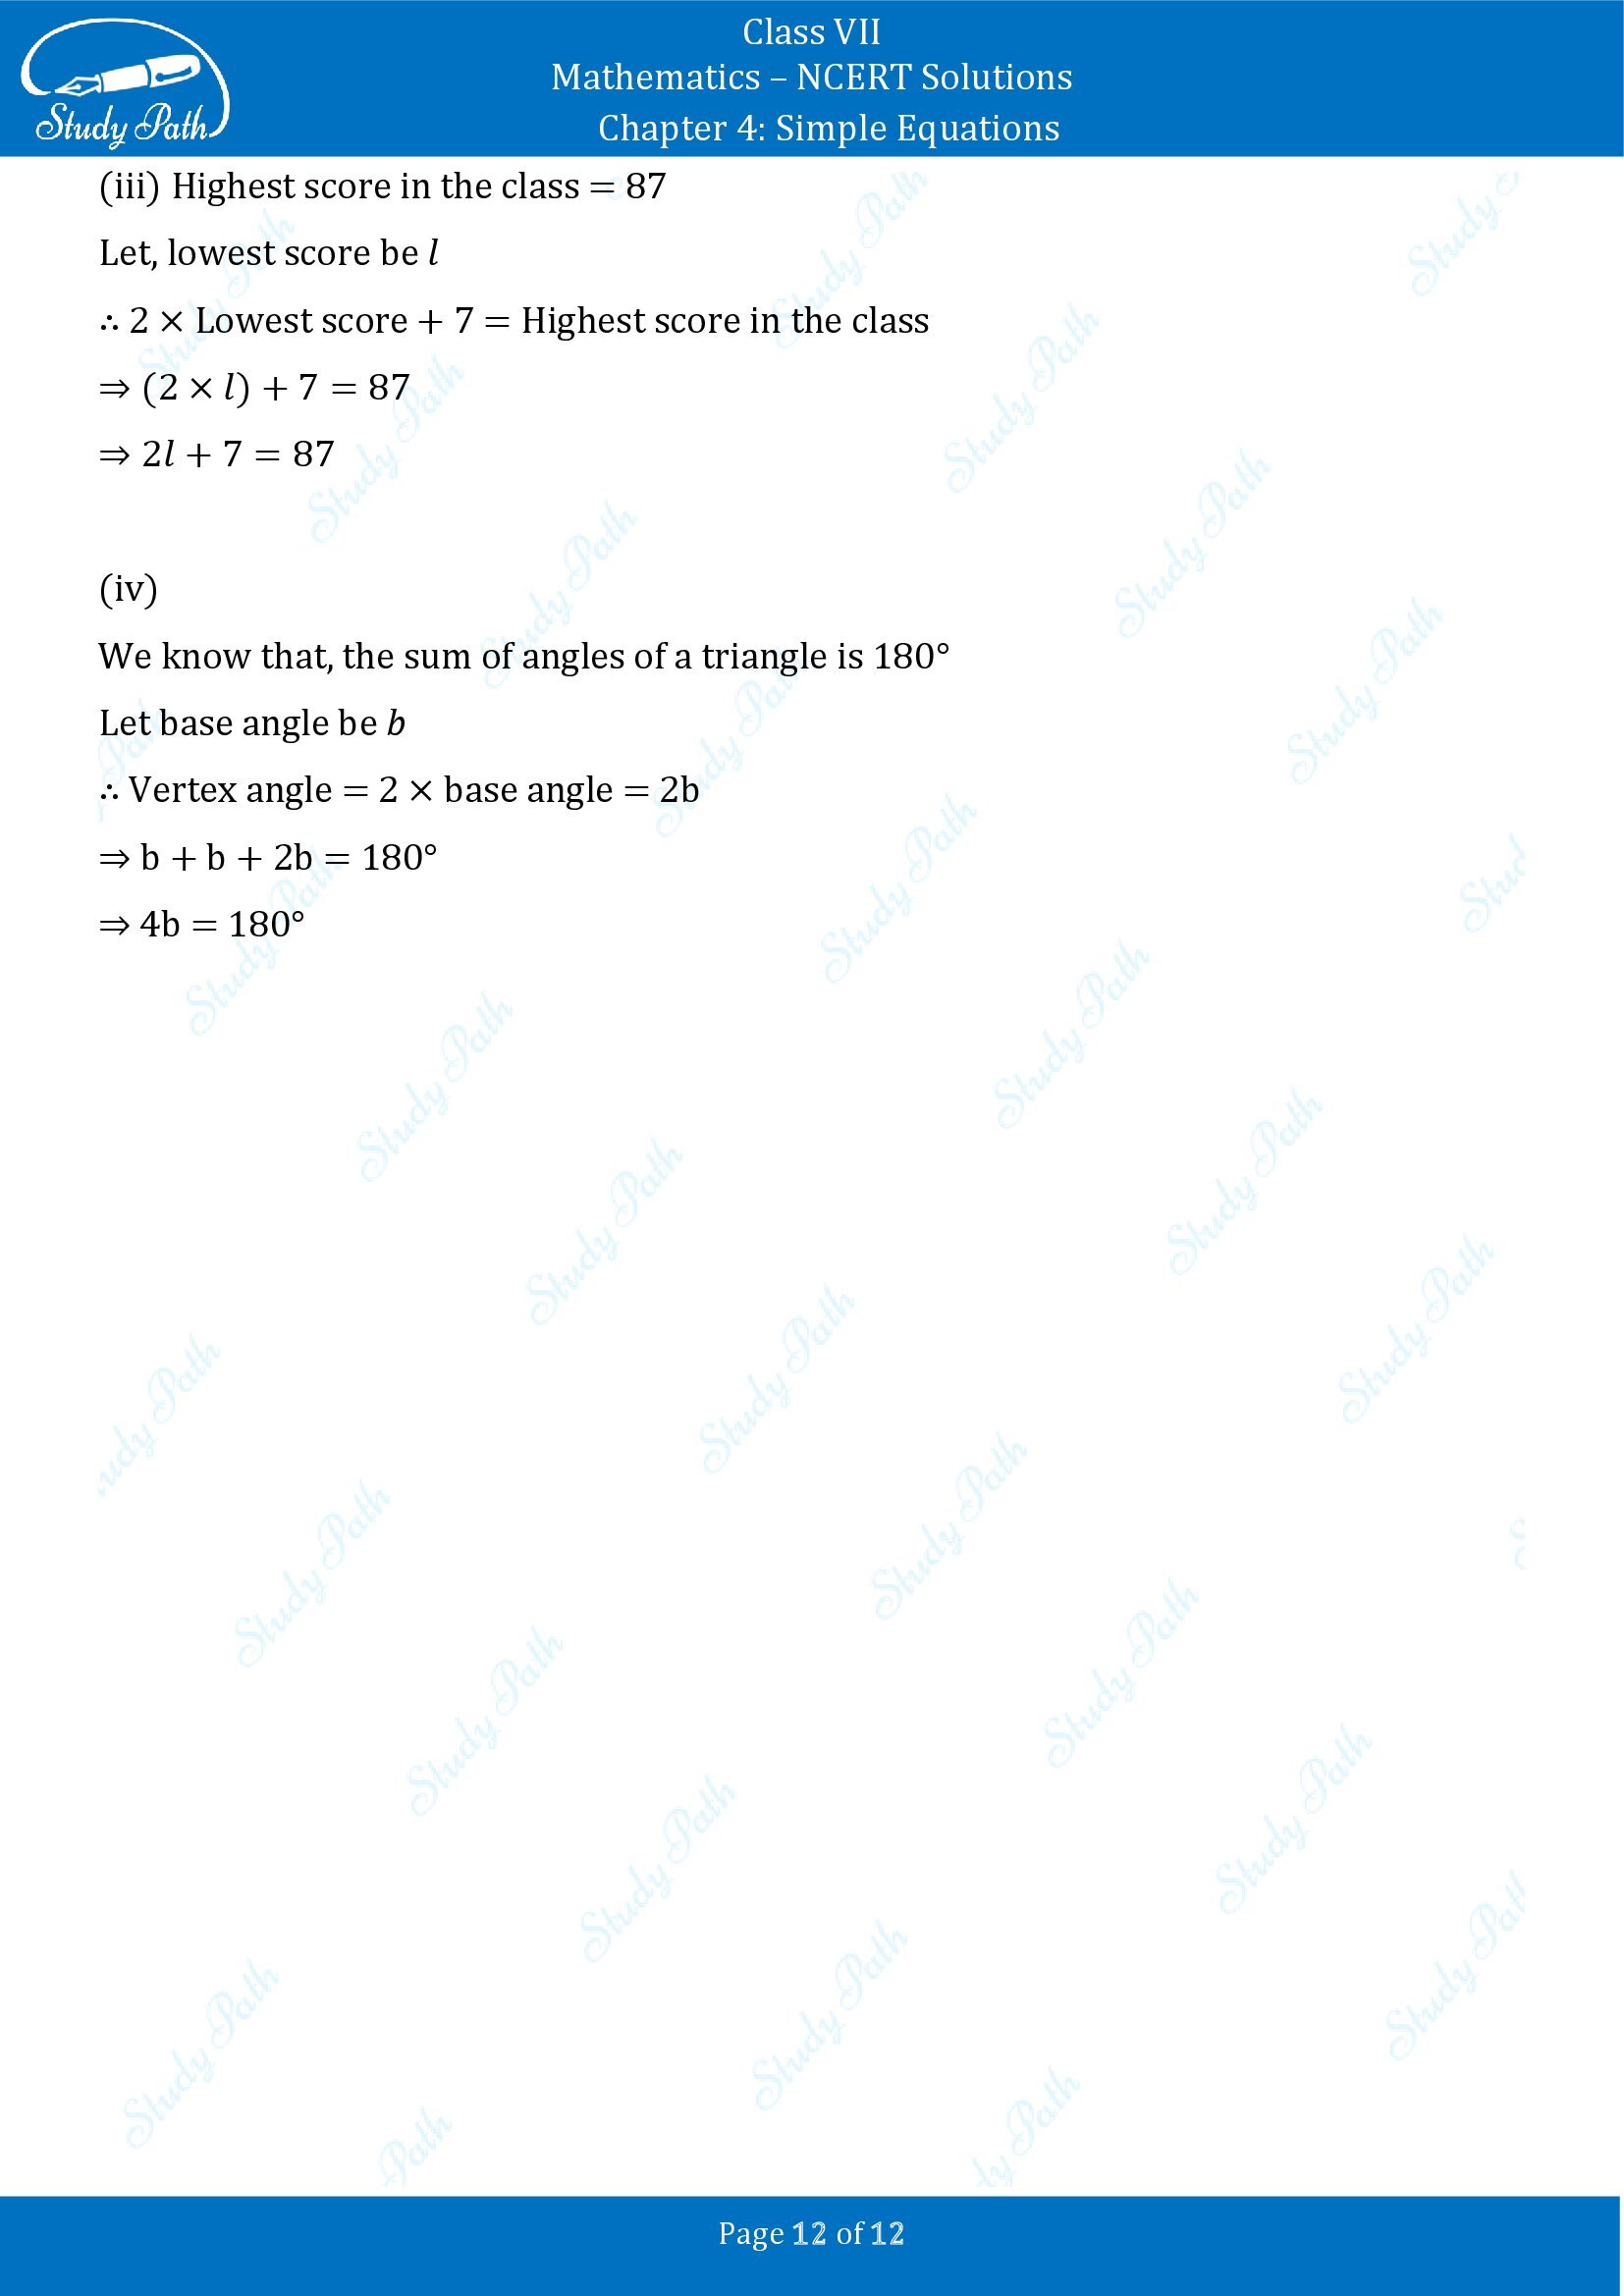 NCERT Solutions for Class 7 Maths Chapter 4 Simple Equations Exercise 4.1 00012